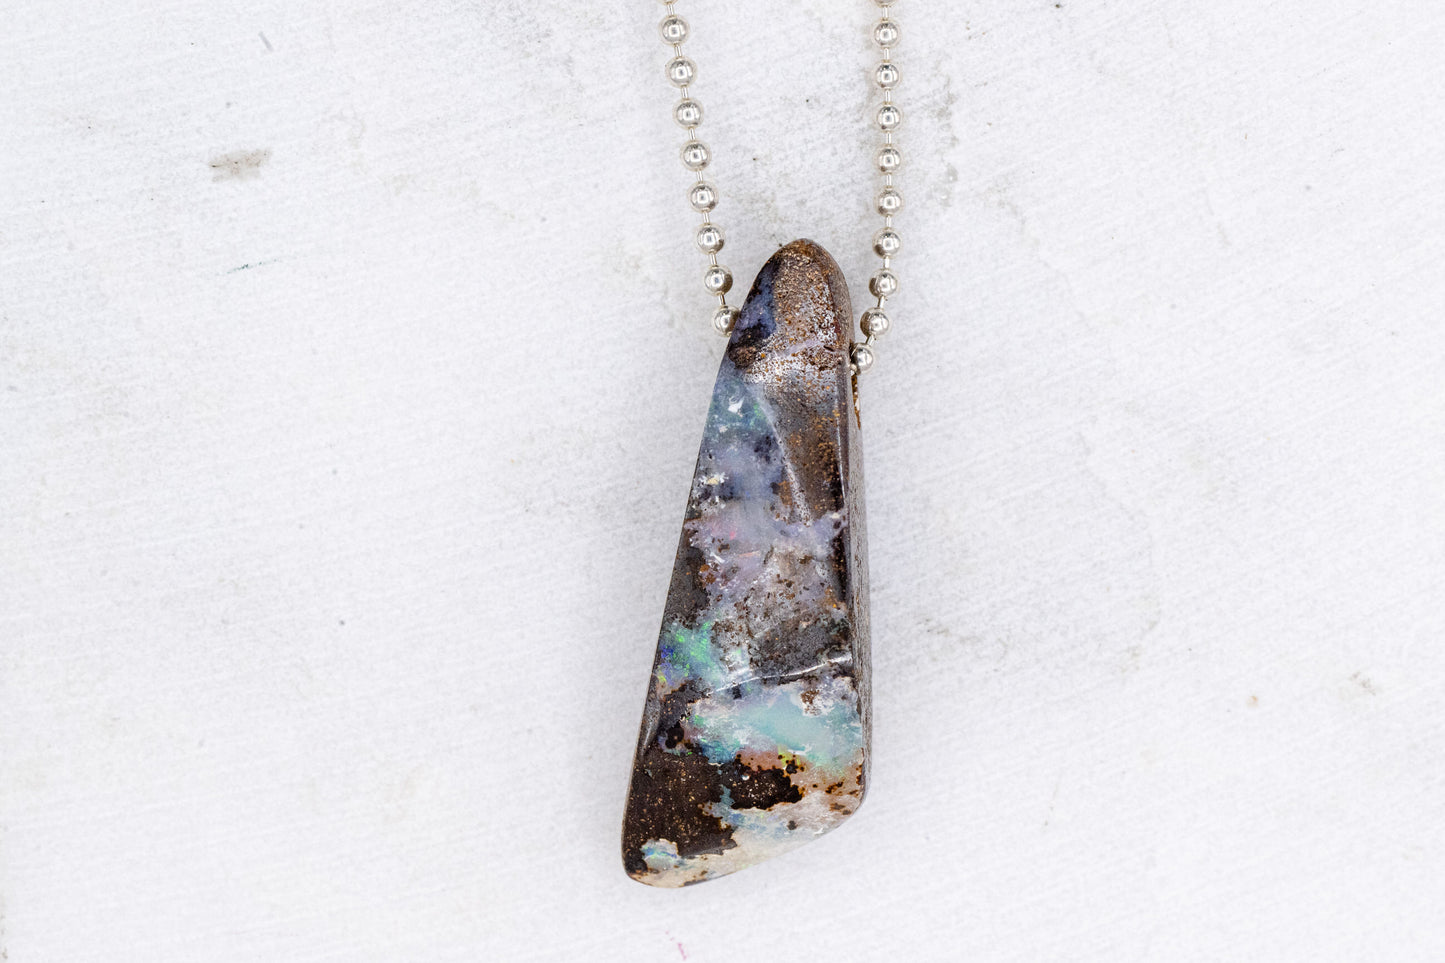 A Handmade Australian Opal Necklace with a piece of opal on it, by Cassin Jewelry.